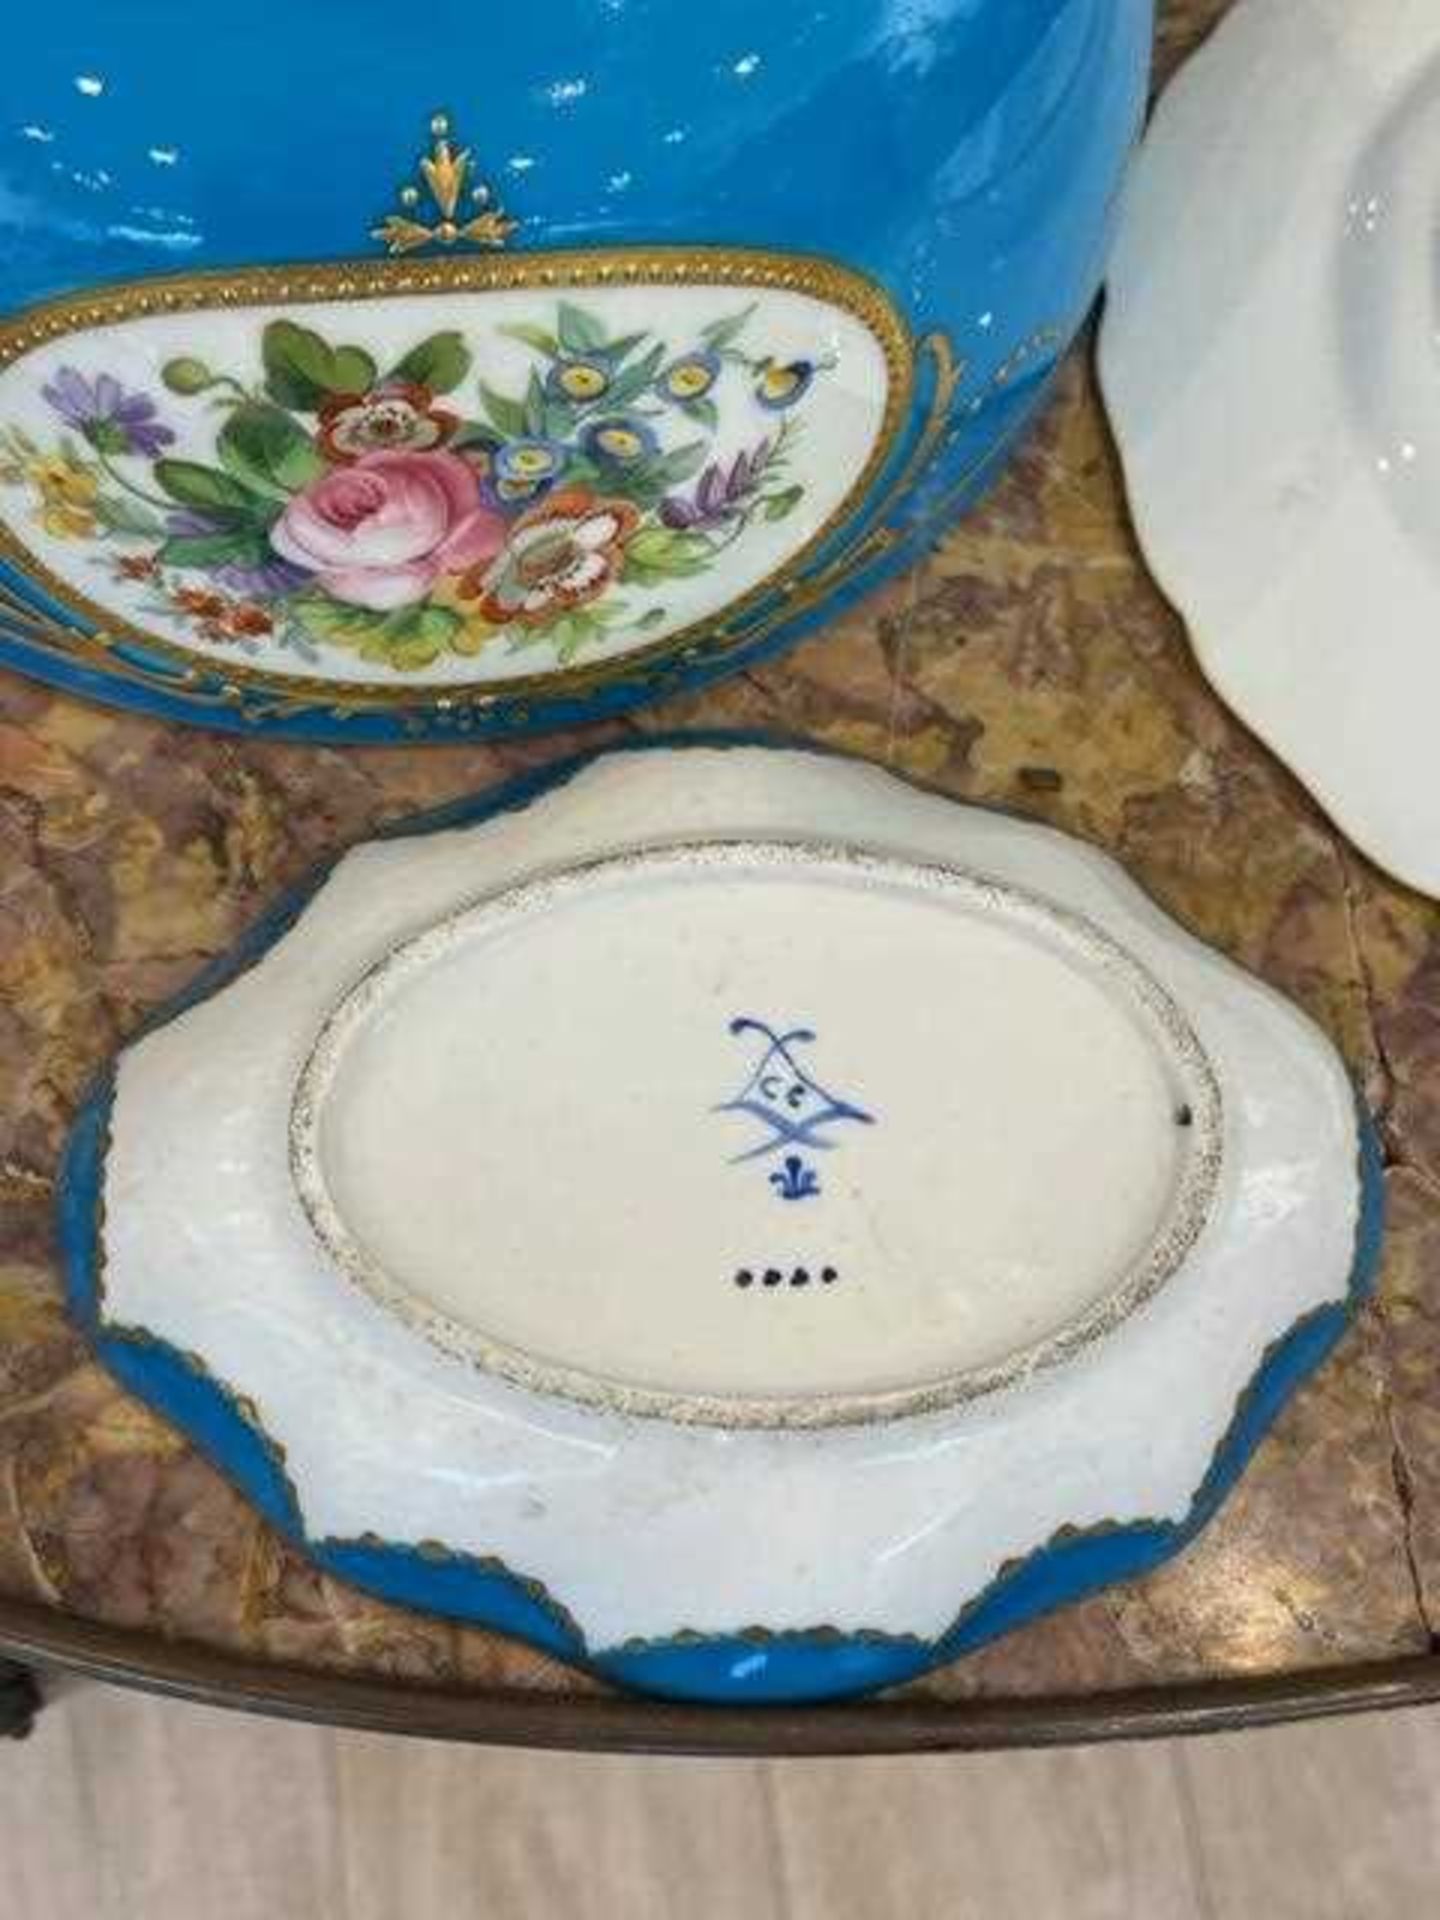 THREE 18TH / 19TH CENTURY BLUE CELESTE AND GILT DECORATED PORCELAIN ITEMS - Image 4 of 9